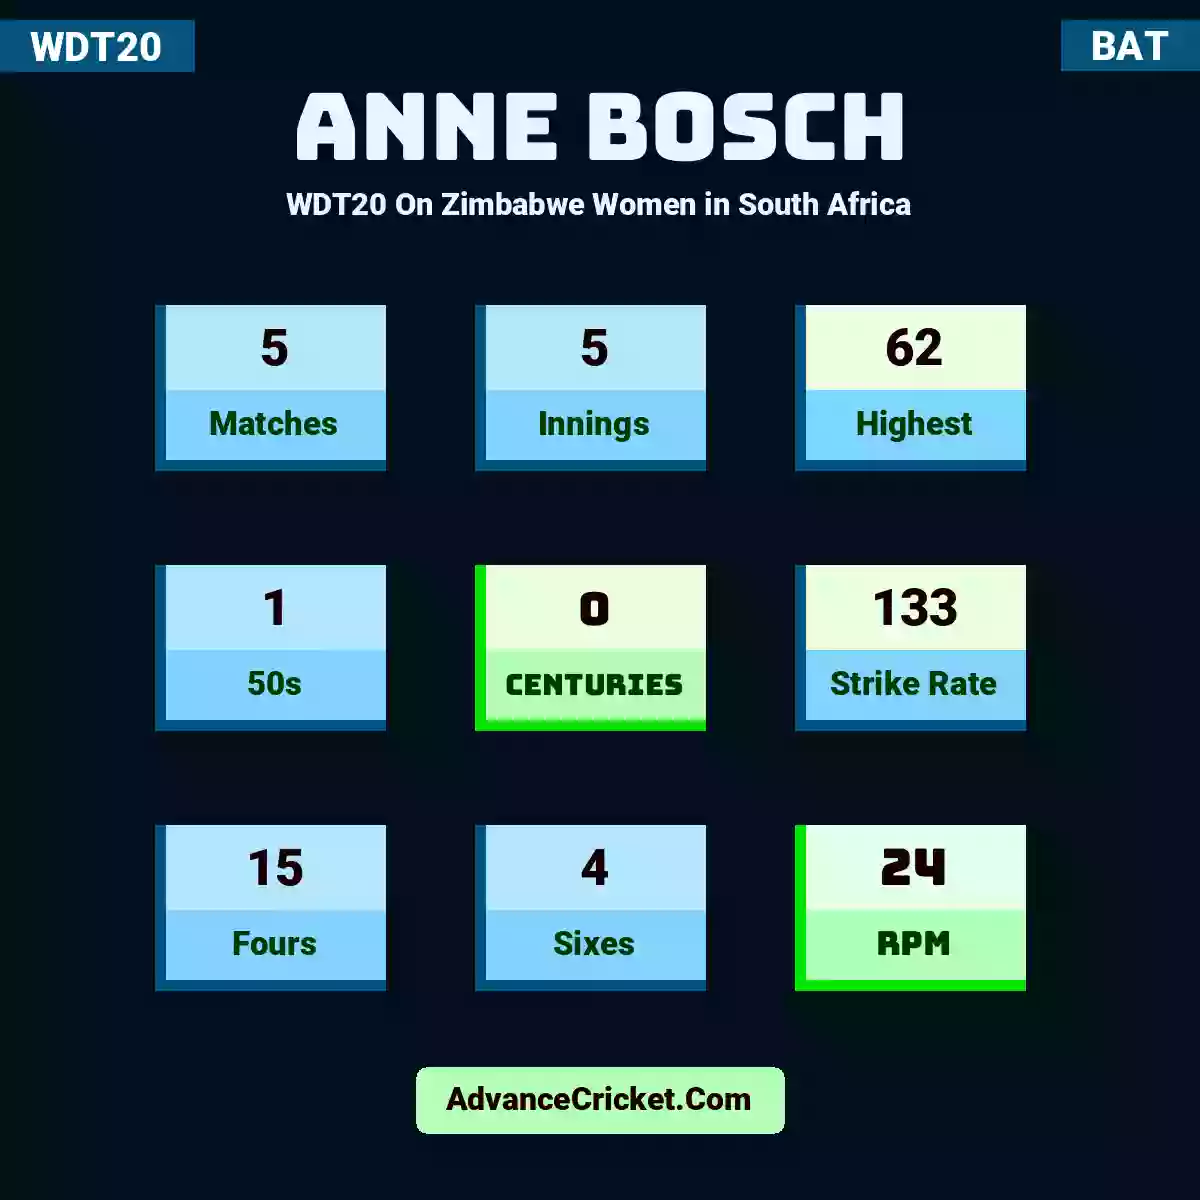 Anne Bosch WDT20  On Zimbabwe Women in South Africa, Anne Bosch played 5 matches, scored 62 runs as highest, 1 half-centuries, and 0 centuries, with a strike rate of 133. A.Bosch hit 15 fours and 4 sixes, with an RPM of 24.